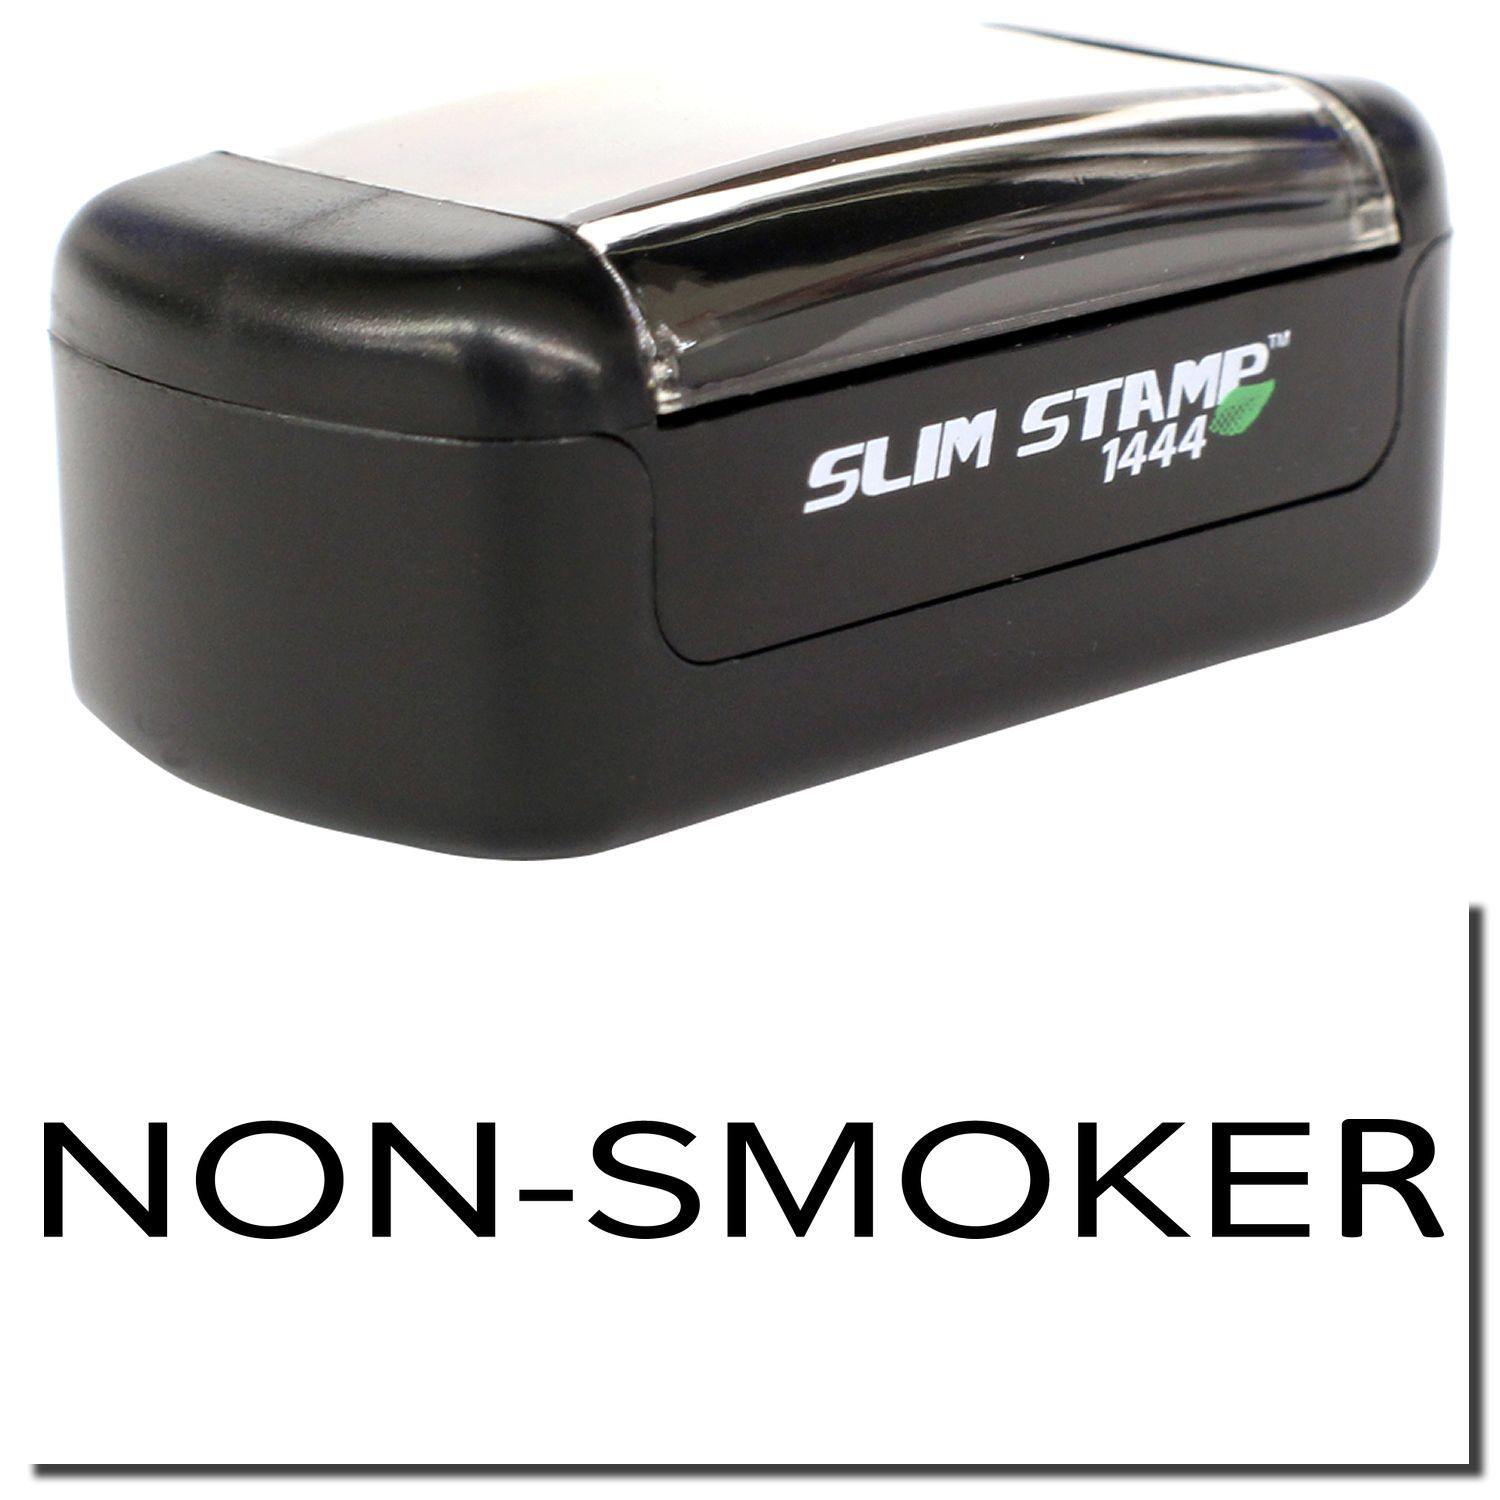 A stock office pre-inked stamp with a stamped image showing how the text "NON-SMOKER" in a narrow font is displayed after stamping.